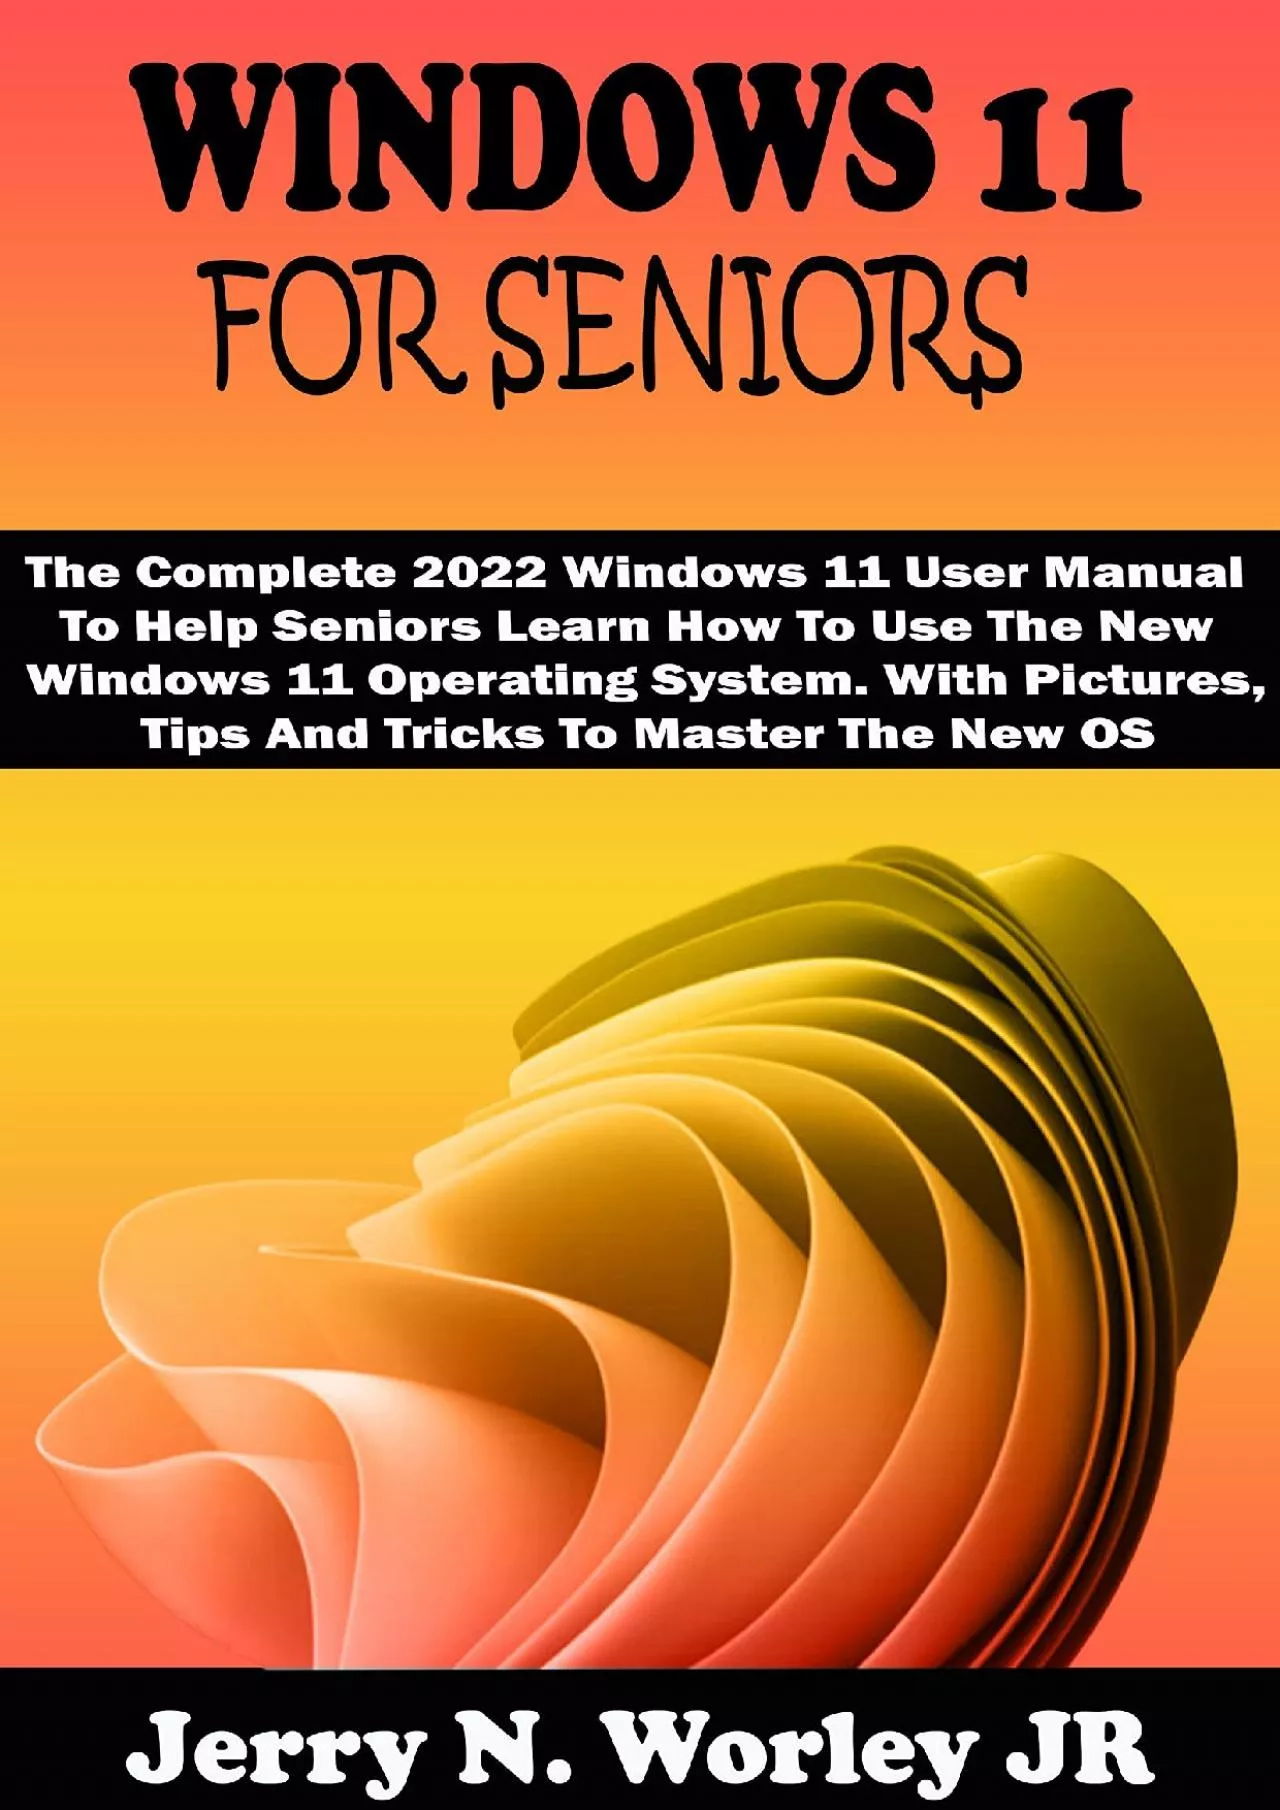 WINDOWS  FOR SENIORS The Complete 2022 Windows  User Manual To Help Seniors Learn How